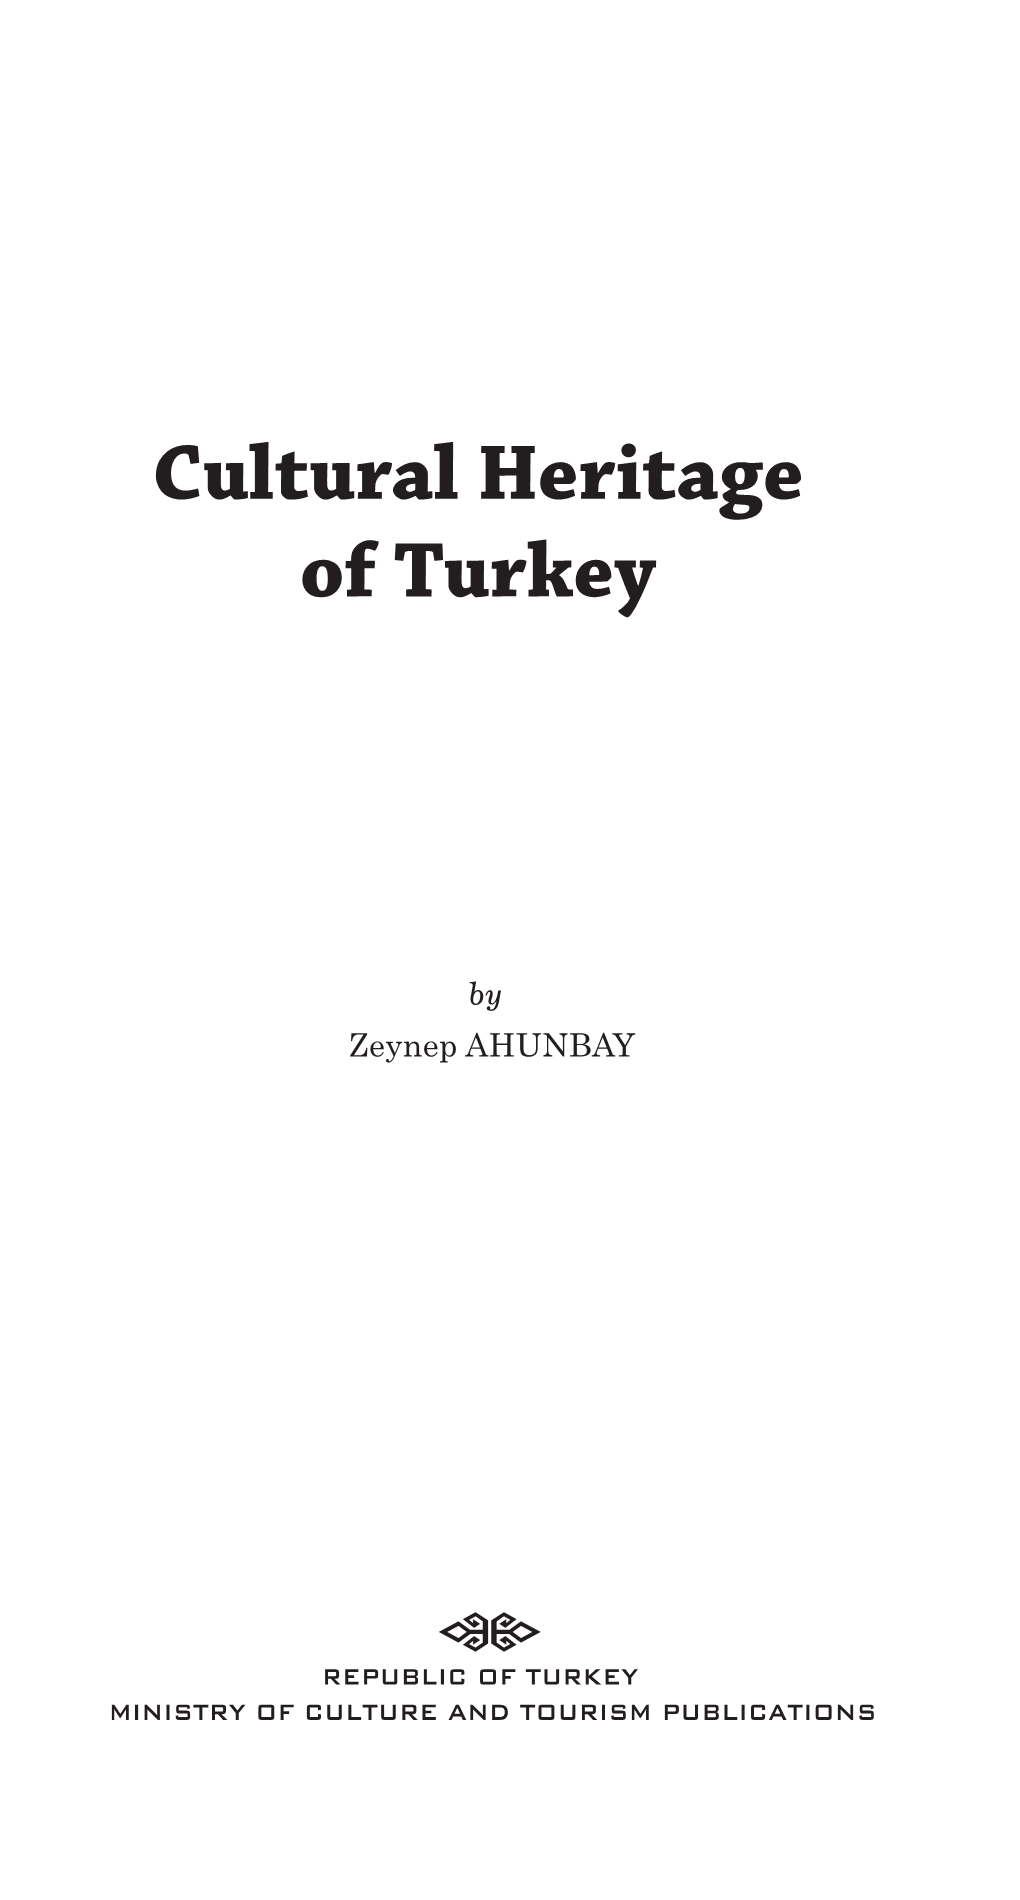 Cultural Heritage of Turkey